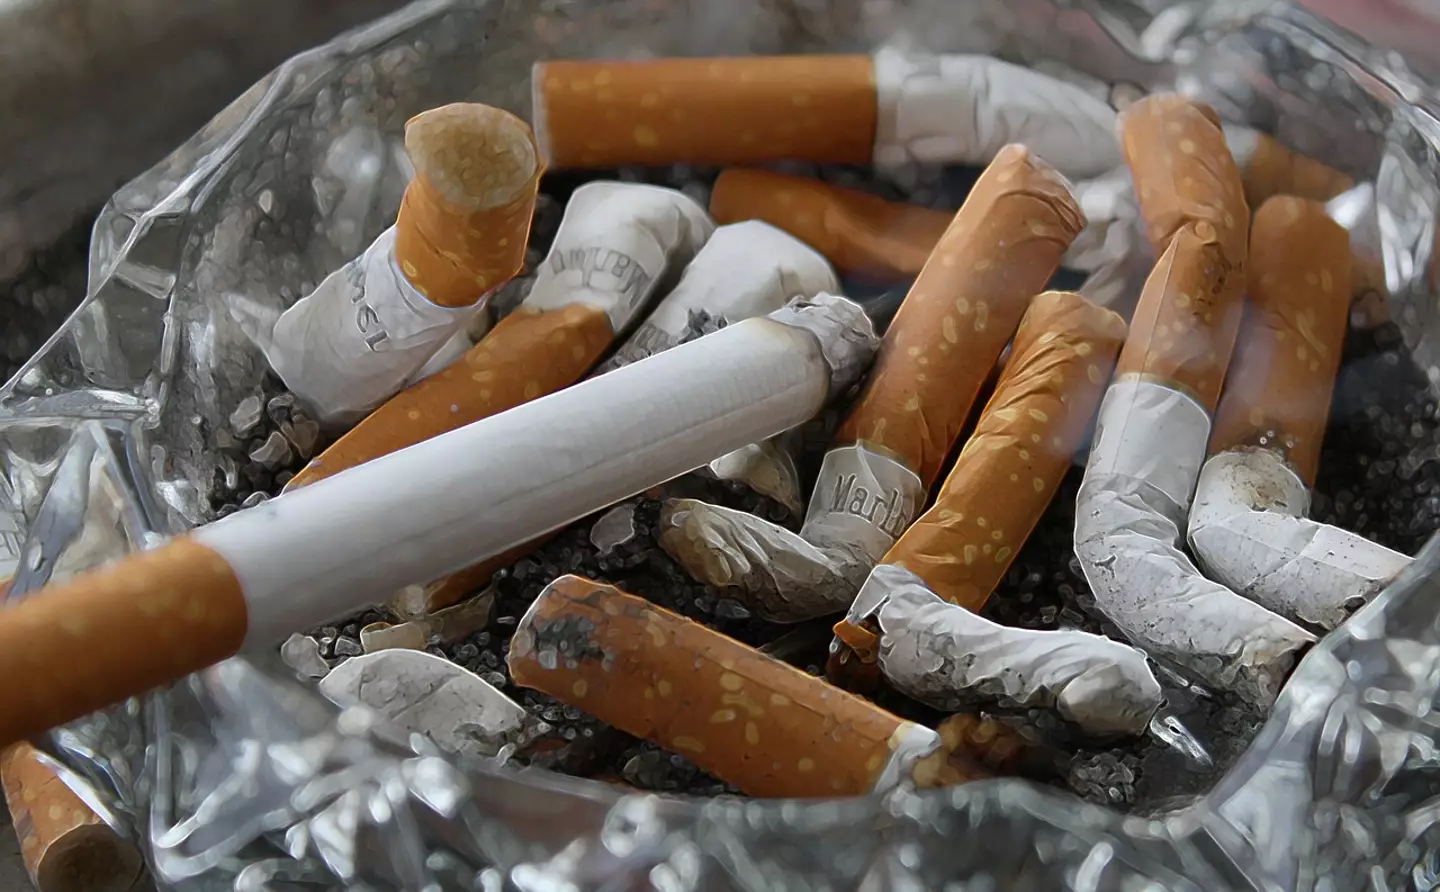 Cigarettes are a leading cause of lung cancer.